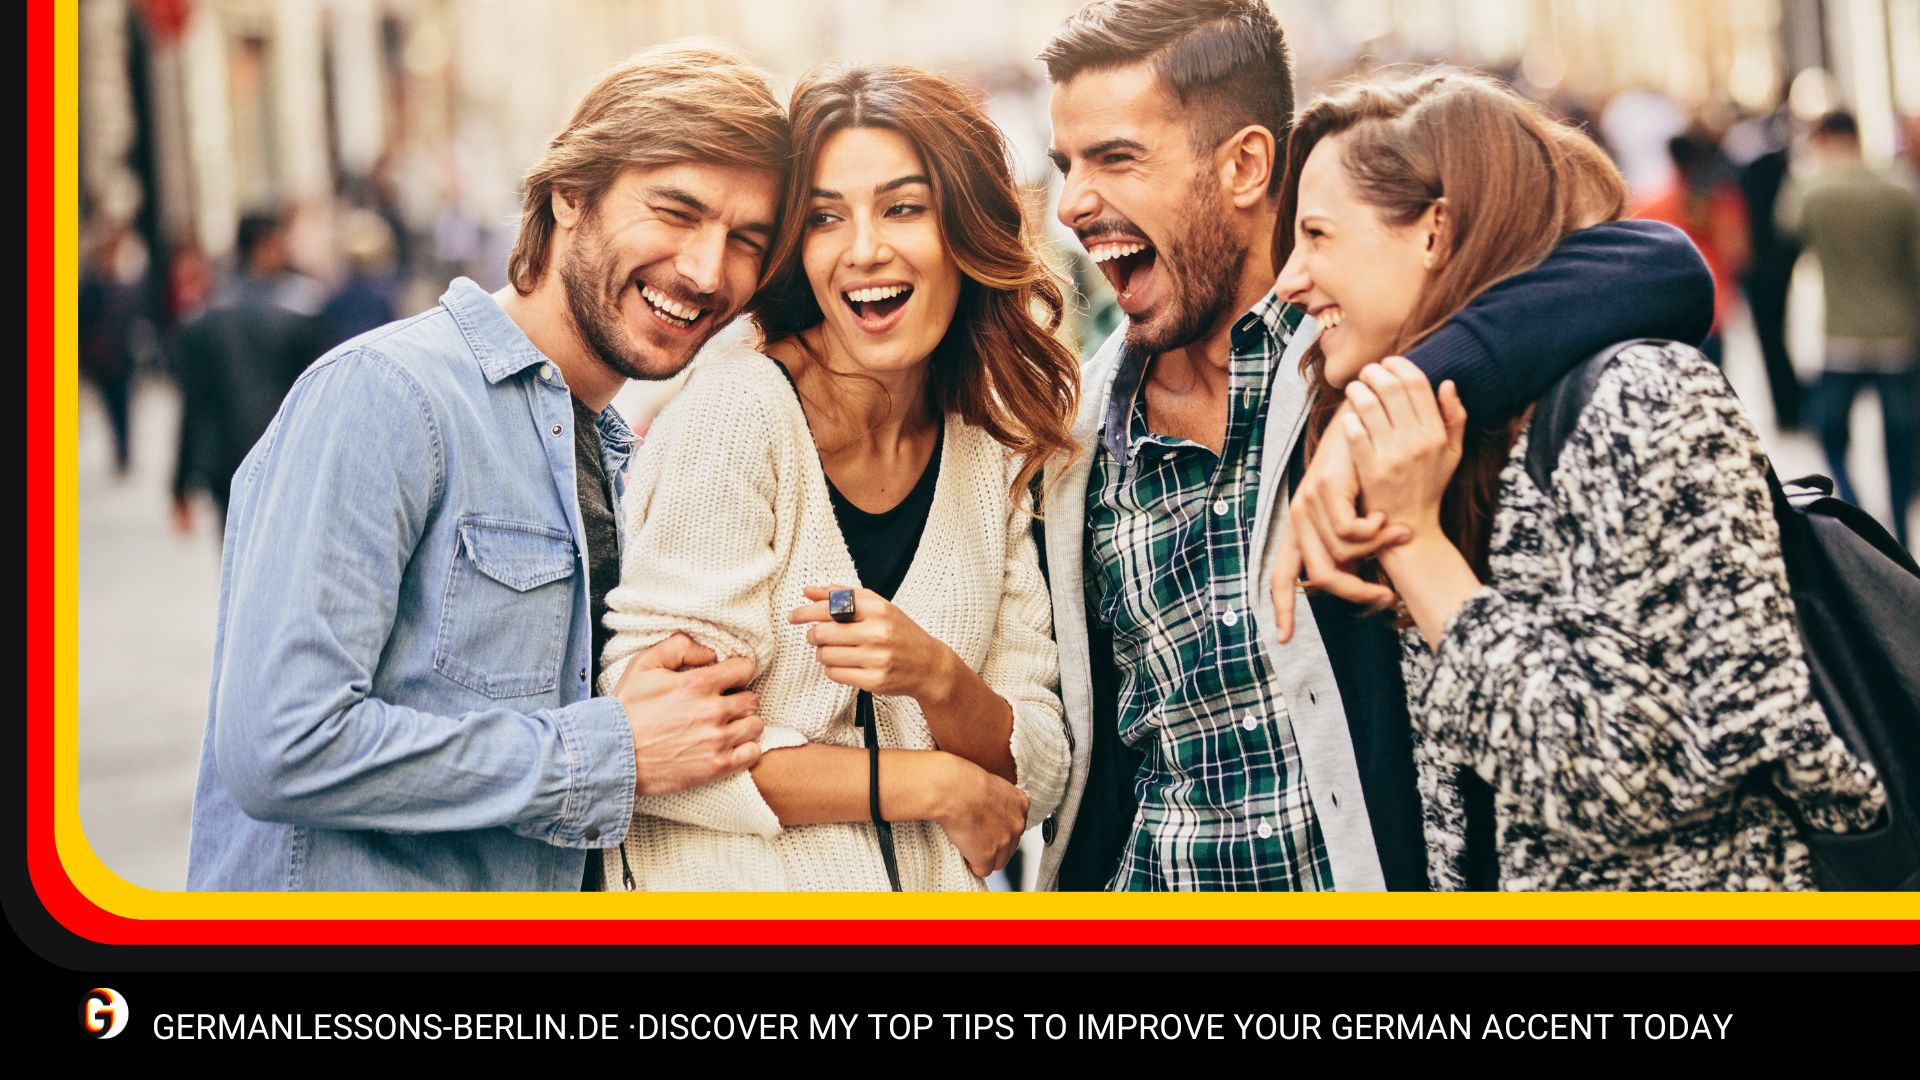 Discover My Top Tips to Improve Your German Accent Today